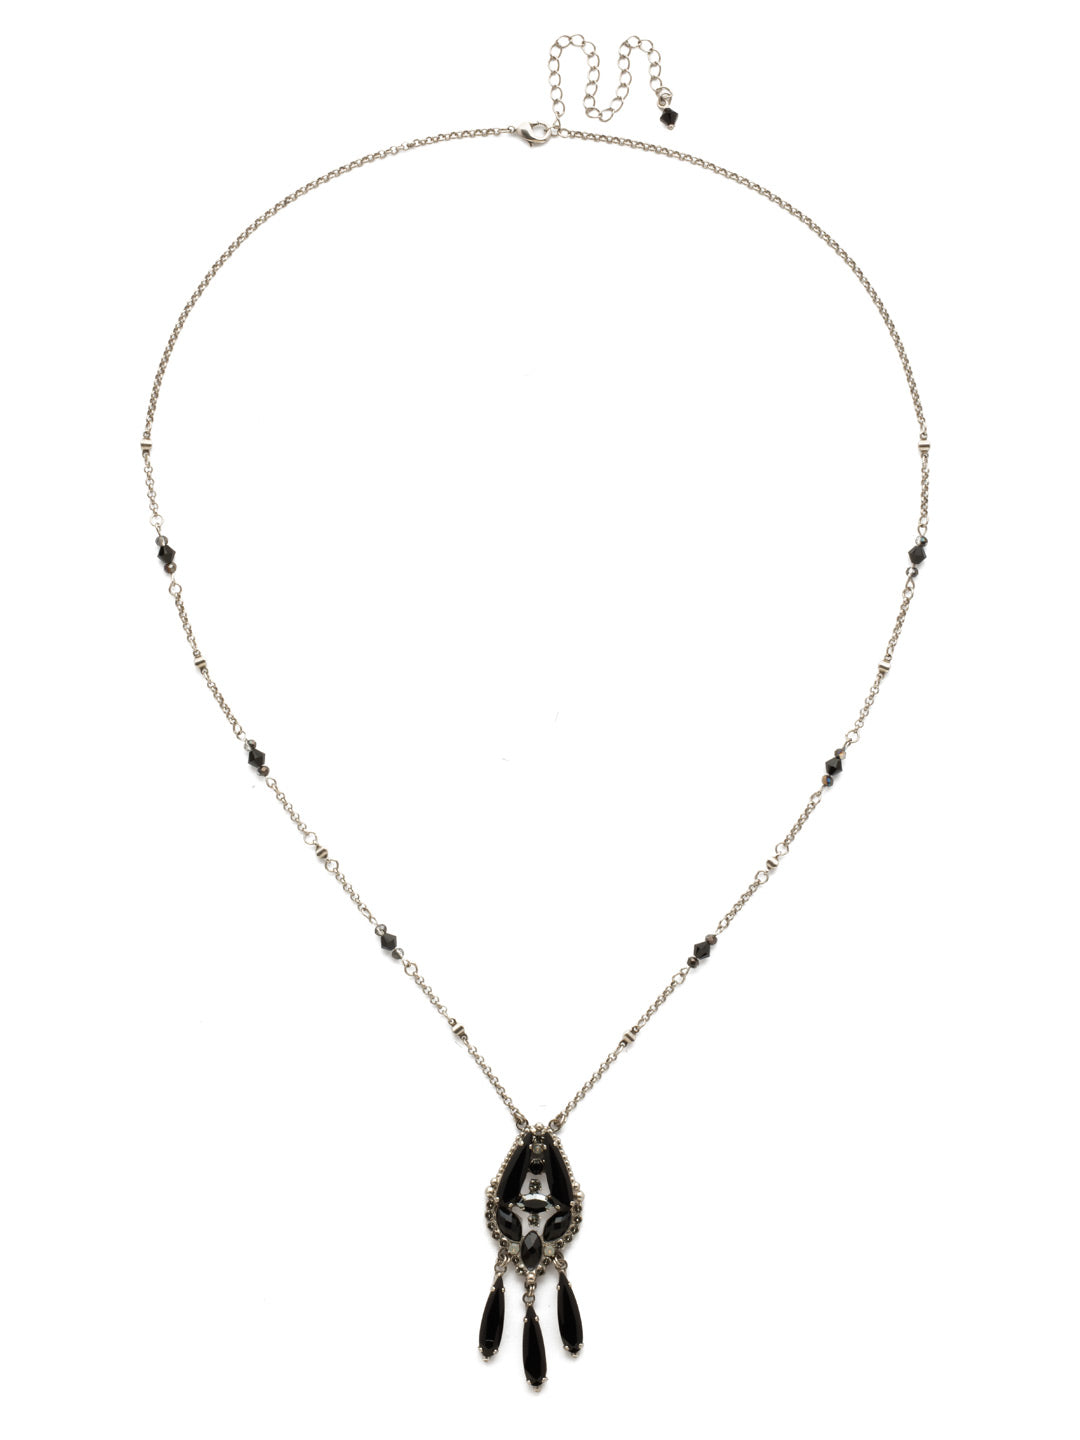 Brilliant Boho Pendant - NDN99ASBON - <p>A fun design with lots of movement perfect for everyday styling! A delicate chain with beaded details completes the bohemian vibe. From Sorrelli's Black Onyx collection in our Antique Silver-tone finish.</p>